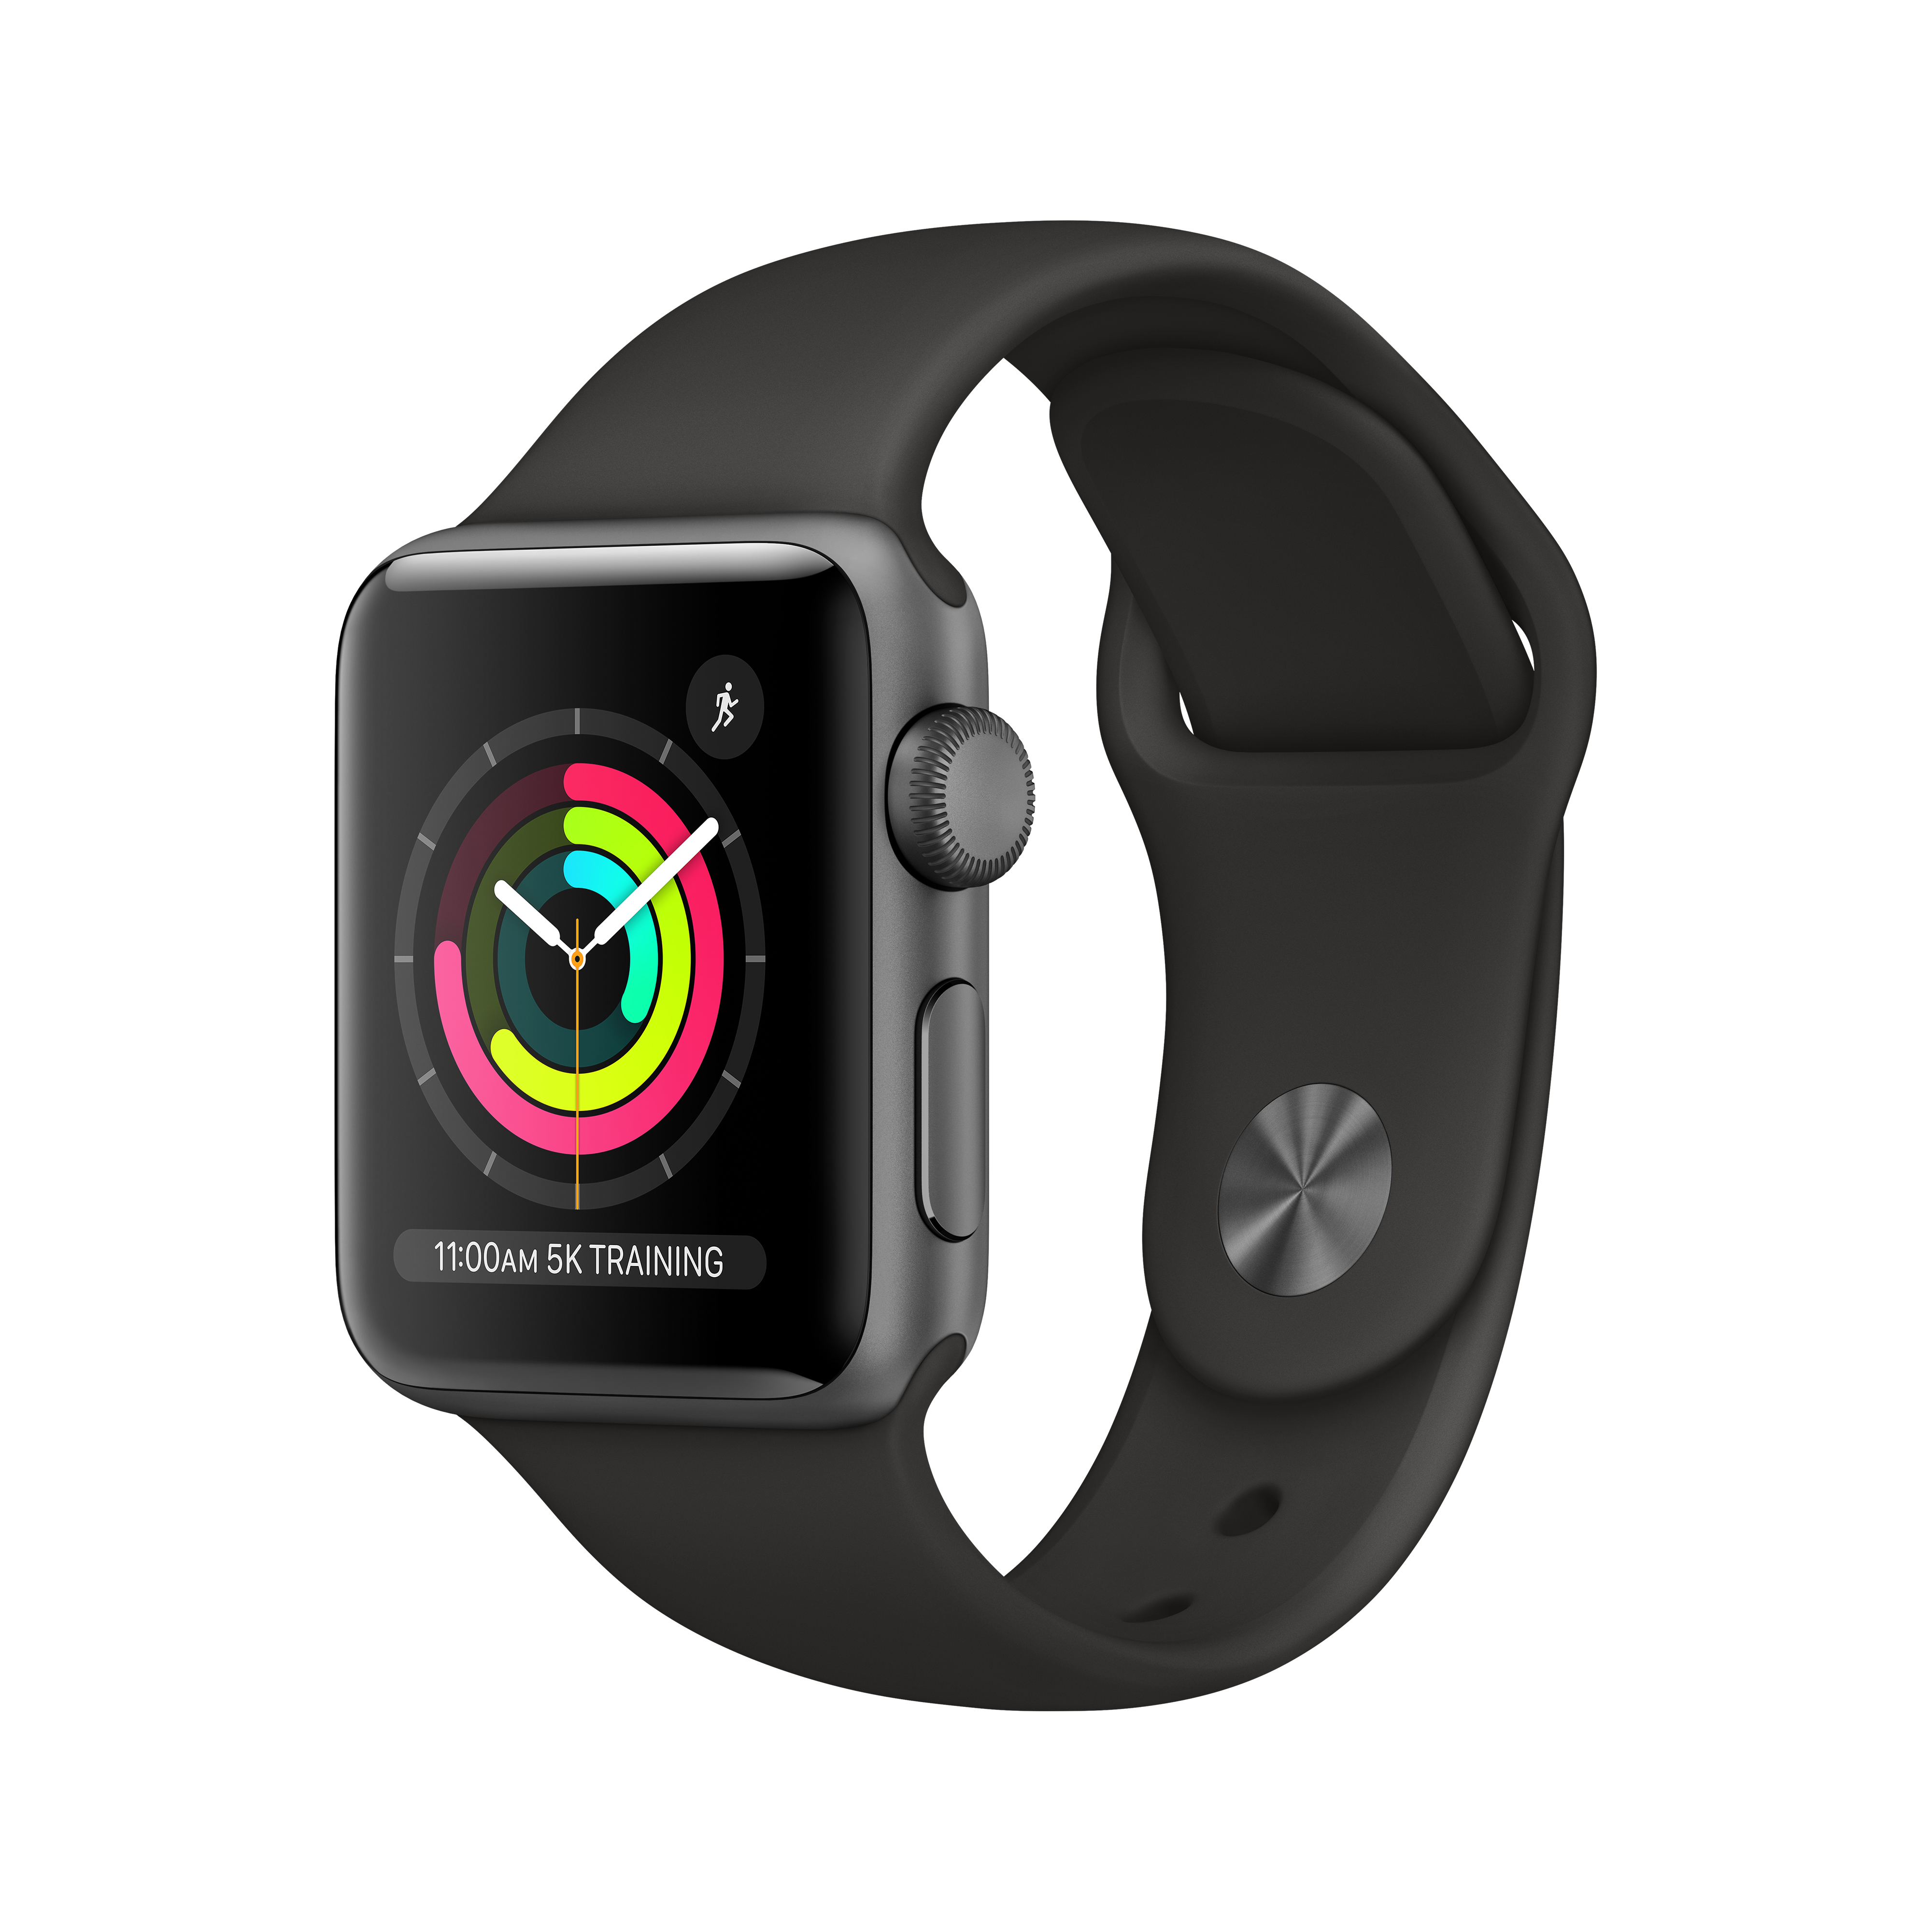 Apple Watch Series 3 GPS Space Gray - 38mm - Black Sport Band - image 1 of 6